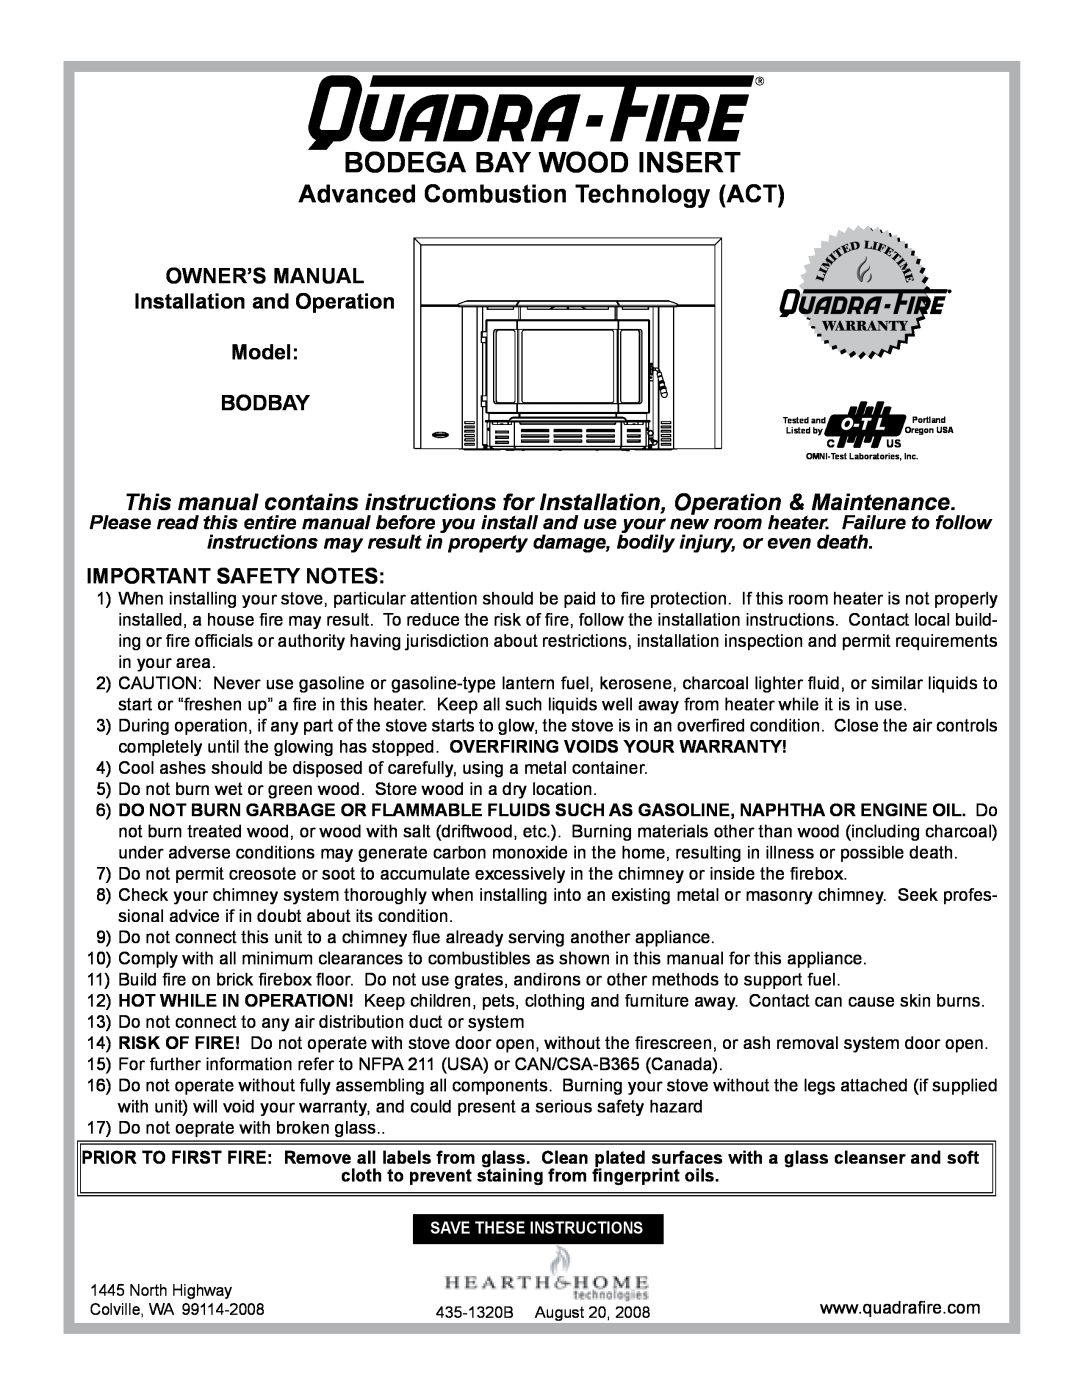 Hearth and Home Technologies BODBAY installation instructions Bodega Bay Wood Insert, Advanced Combustion Technology ACT 